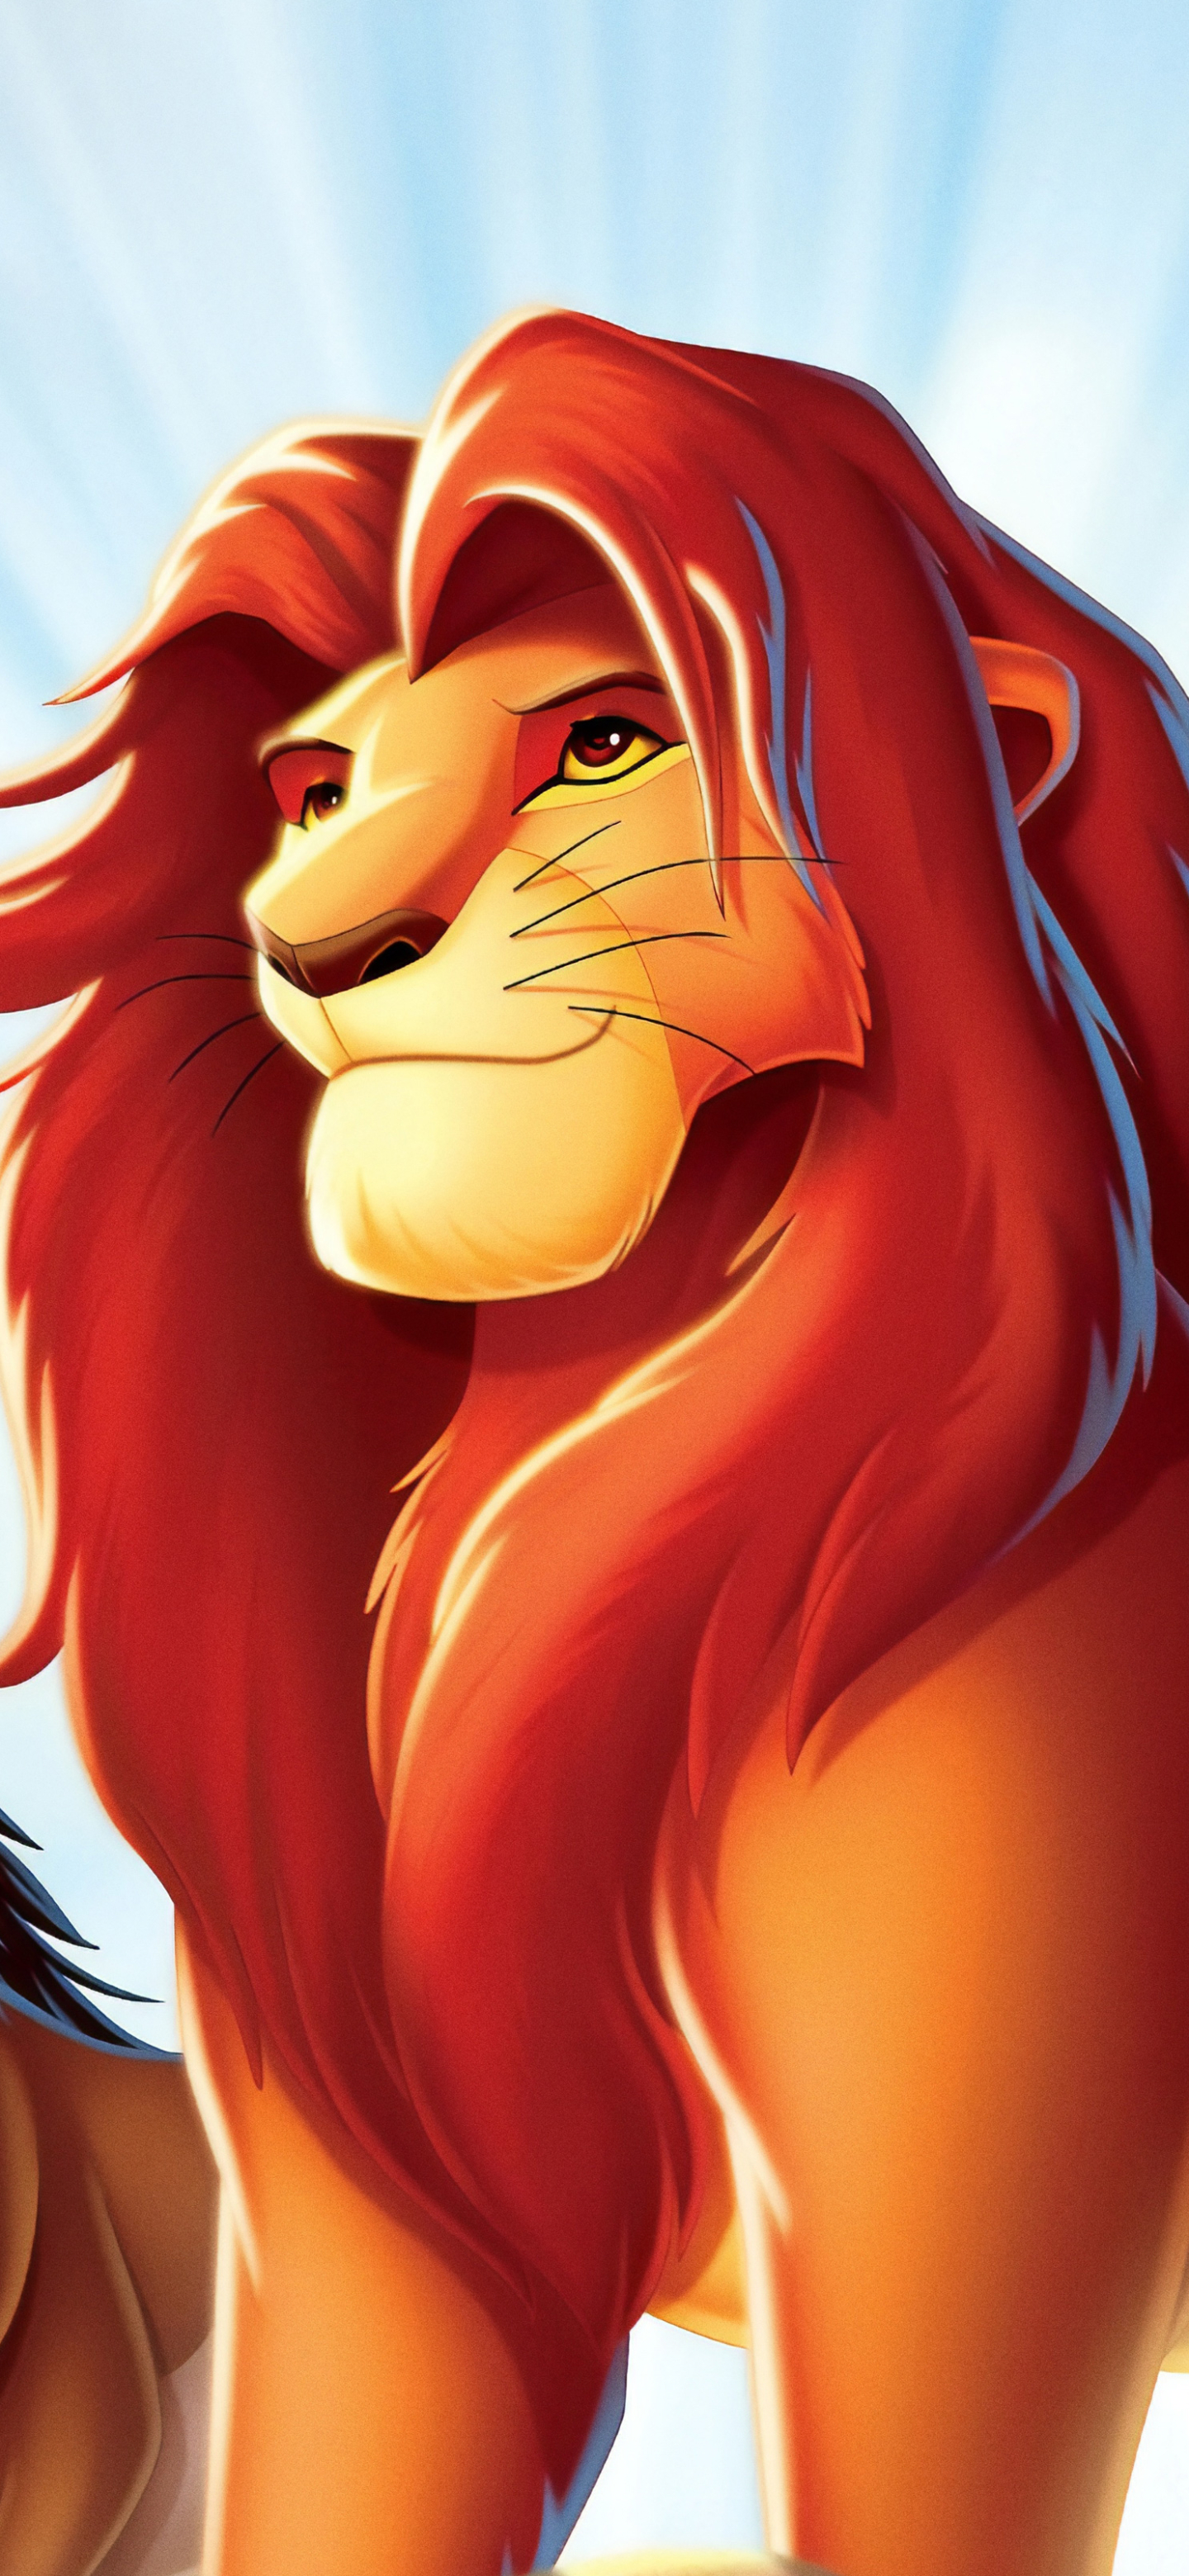 The Lion King (1994) Phone Wallpaper